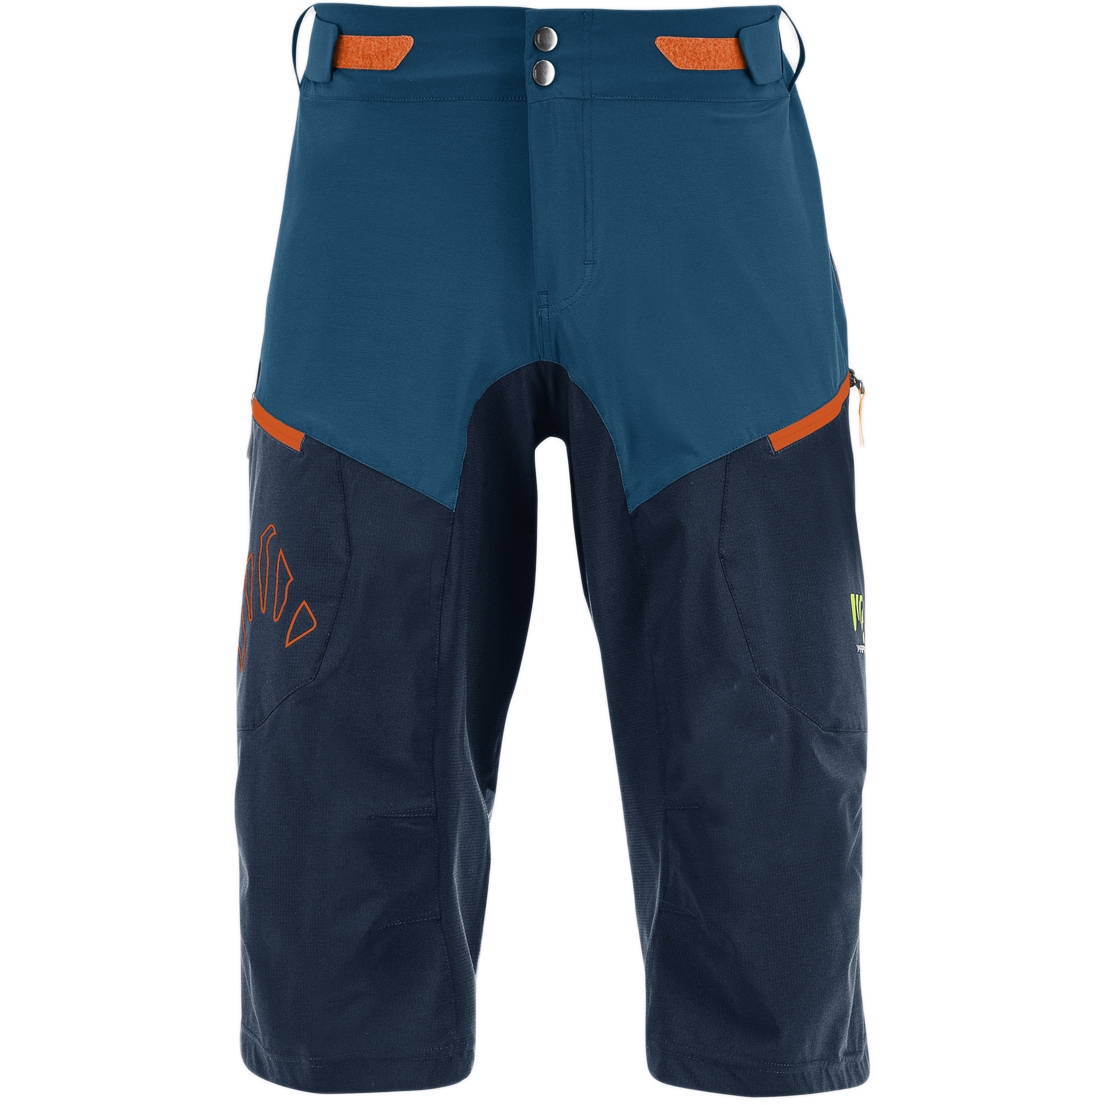 Picture of Karpos Val Federia Evo MTB Shorts Men - moroccan blue/outer space